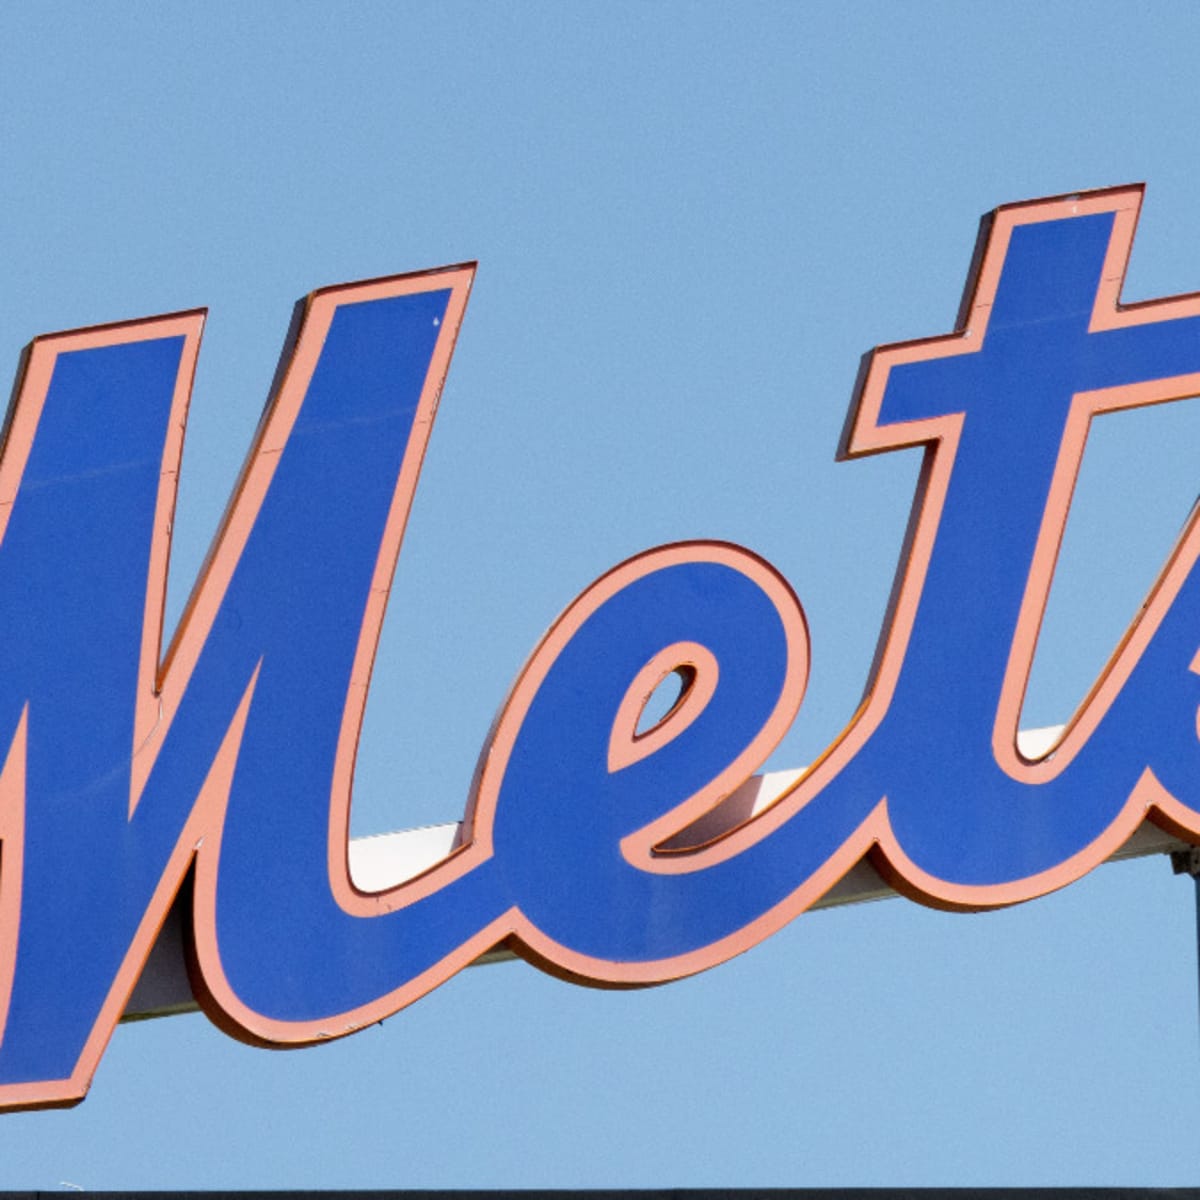 New York Mets on X: Hot! RT @mlb: Hot or not: @Mets throwback